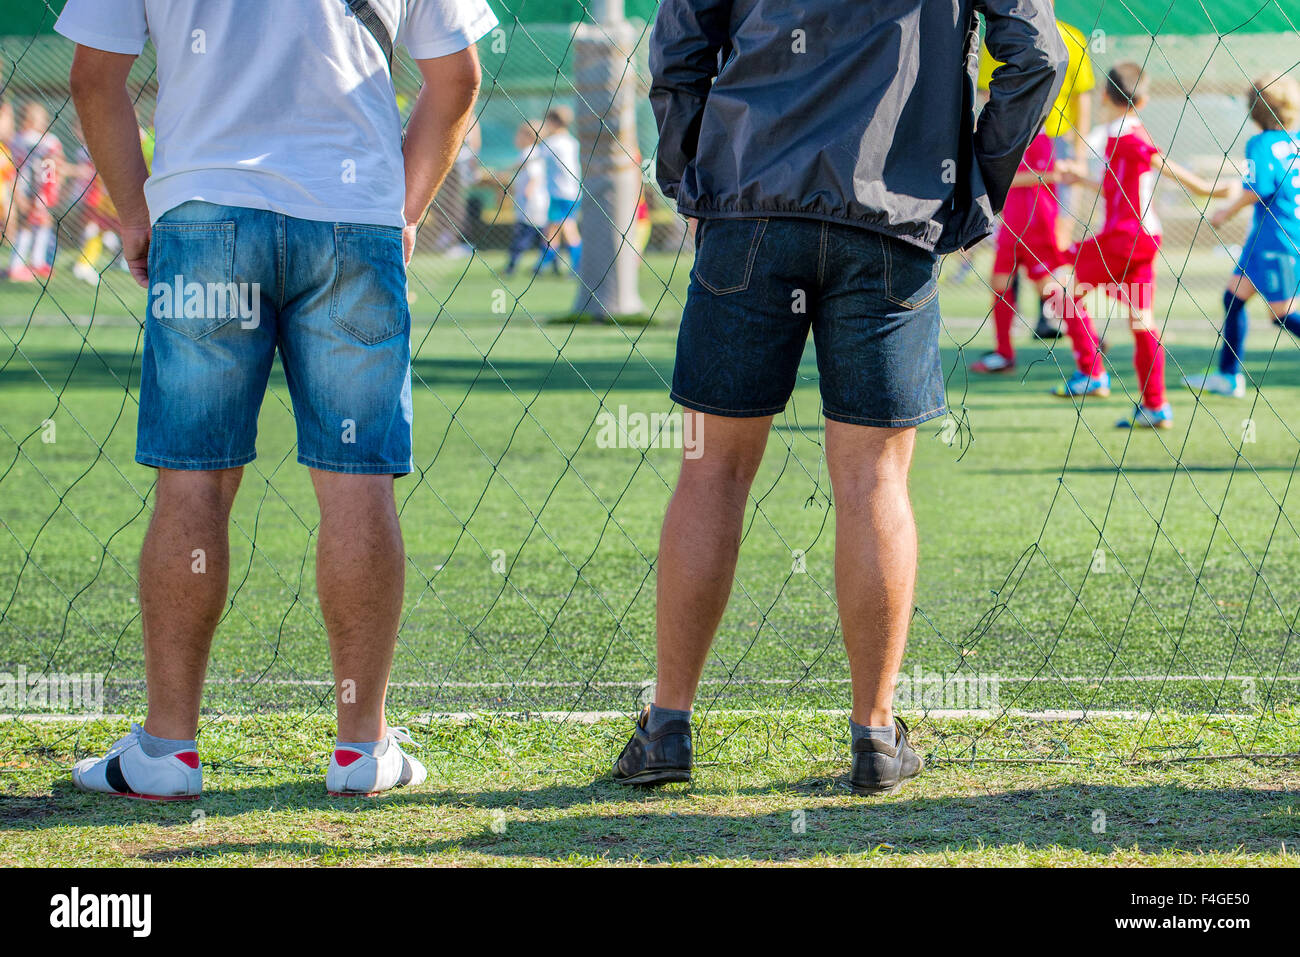 Fathers watching their sons playing soccer game, kids playing football, selective focus Stock Photo